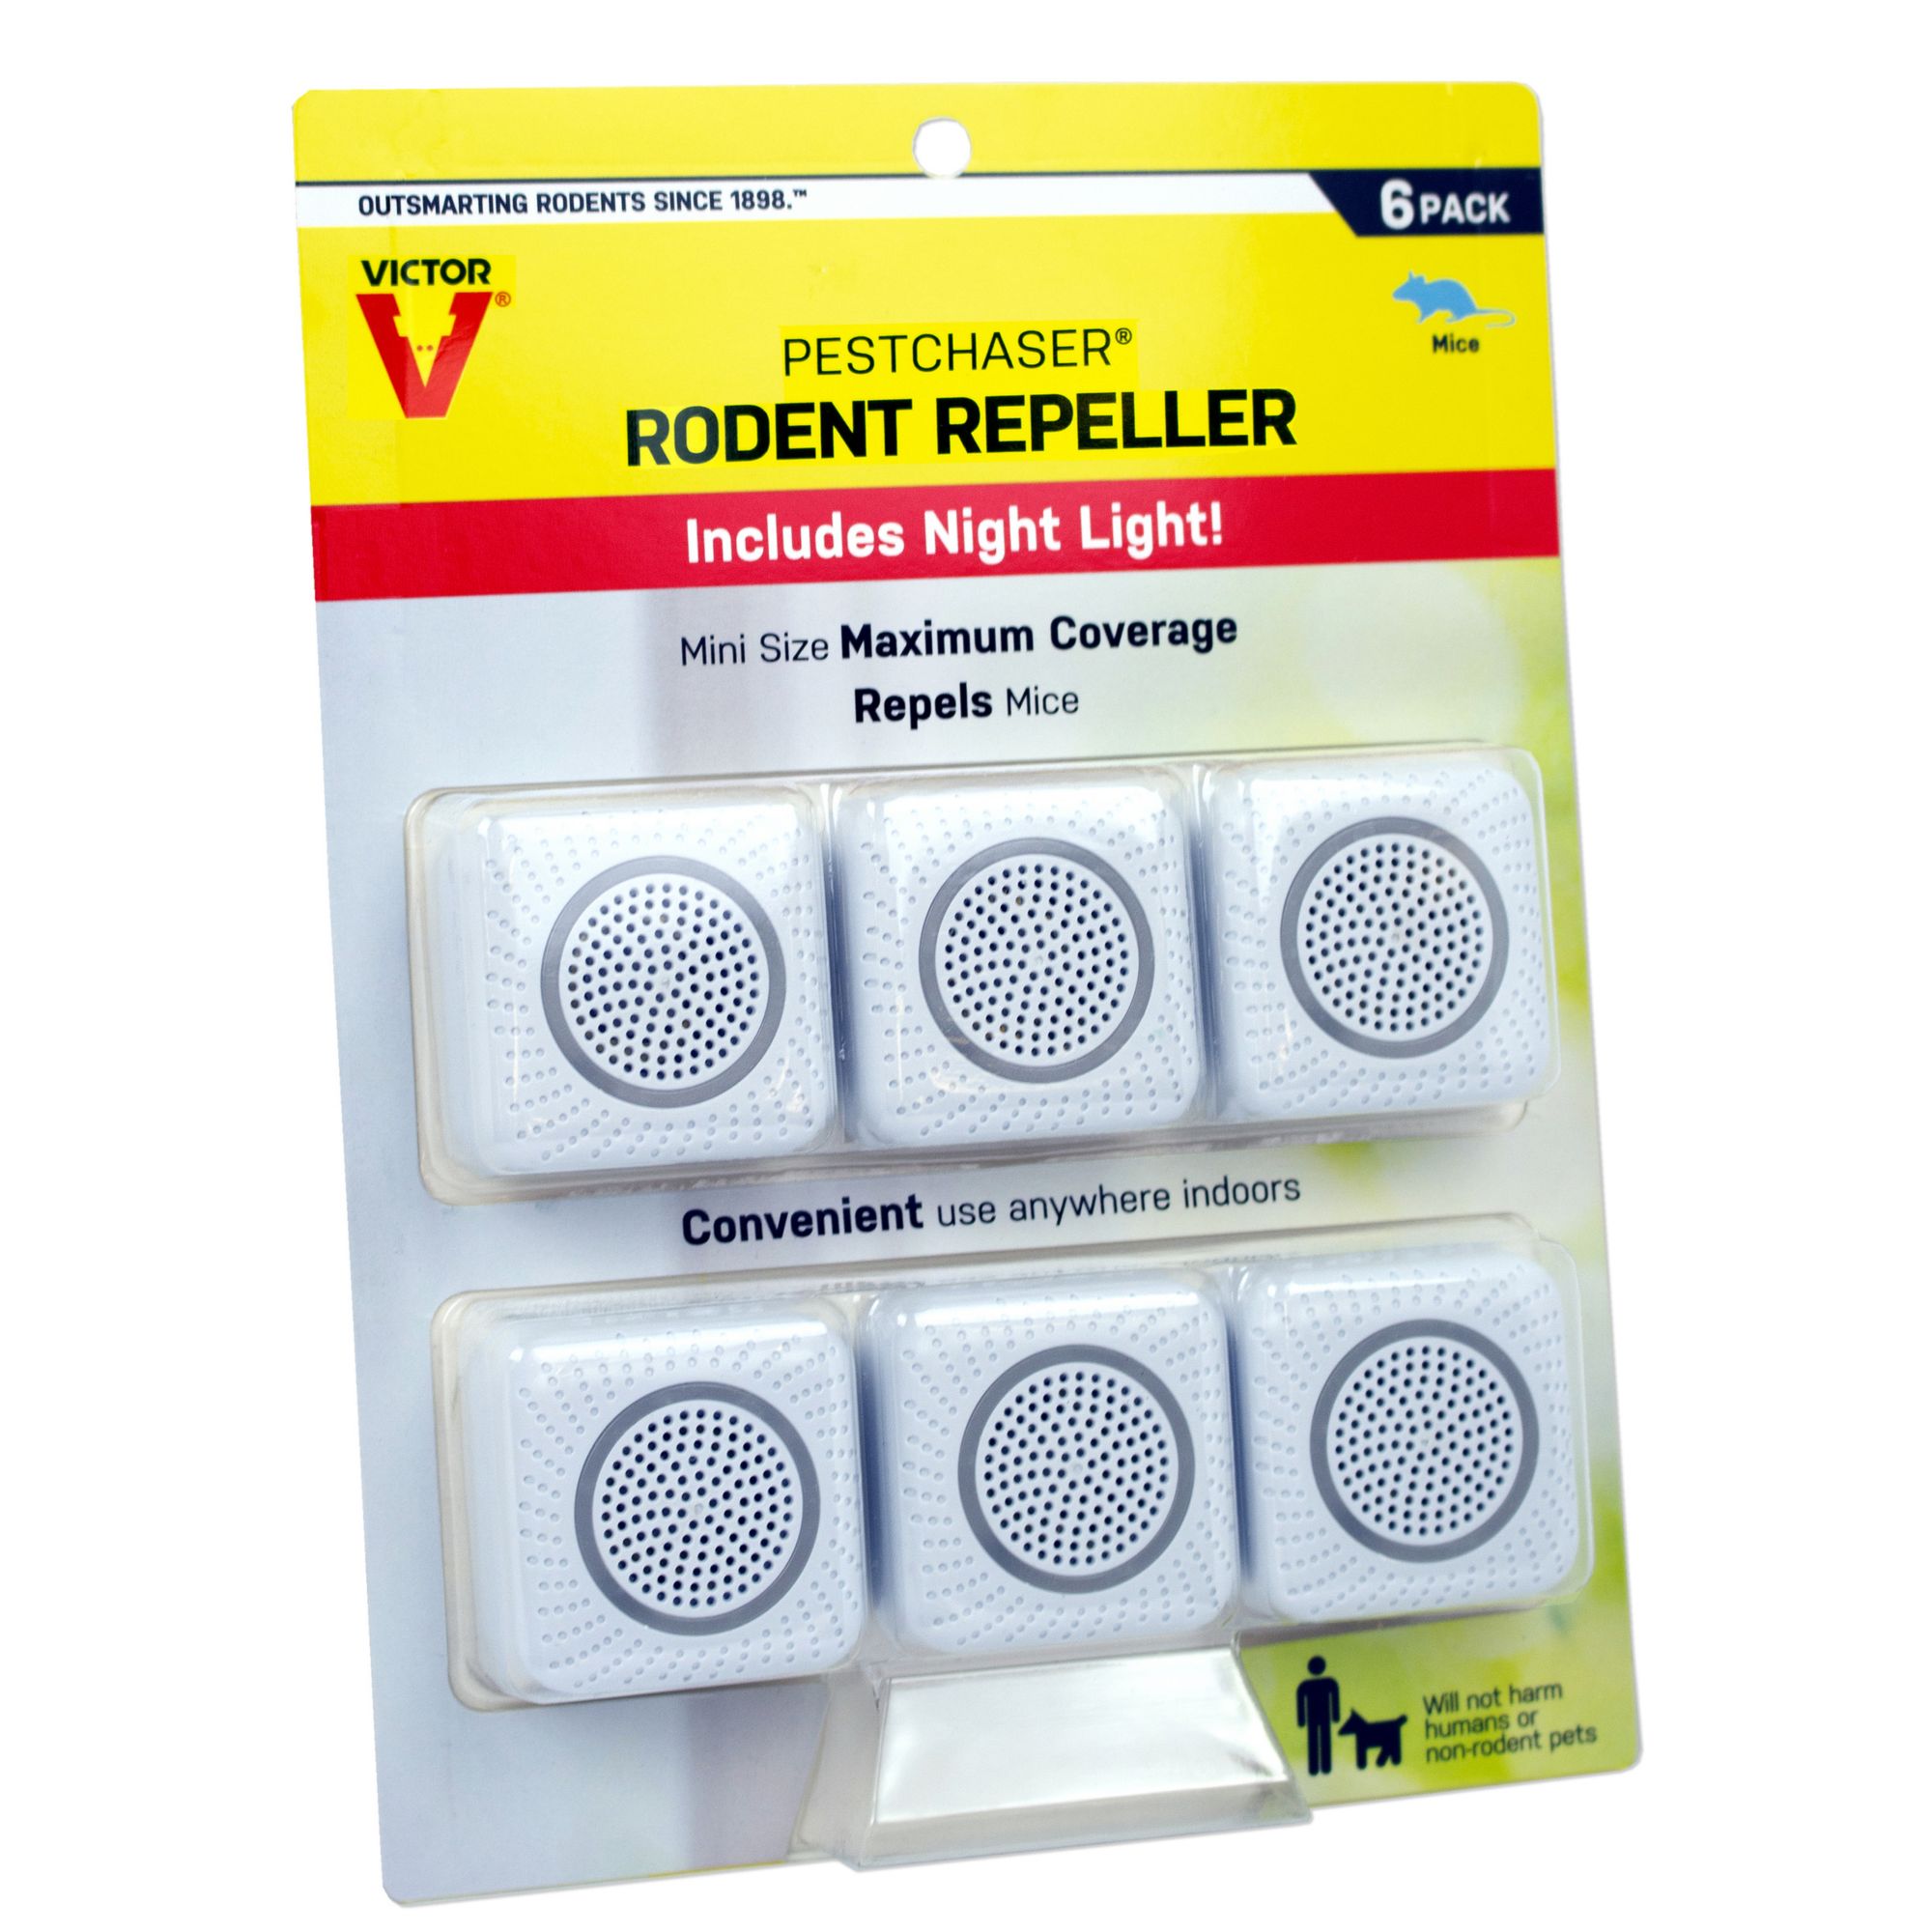 Victor® Pestchaser® Rodent Repeller with Nightlight - 3 Units